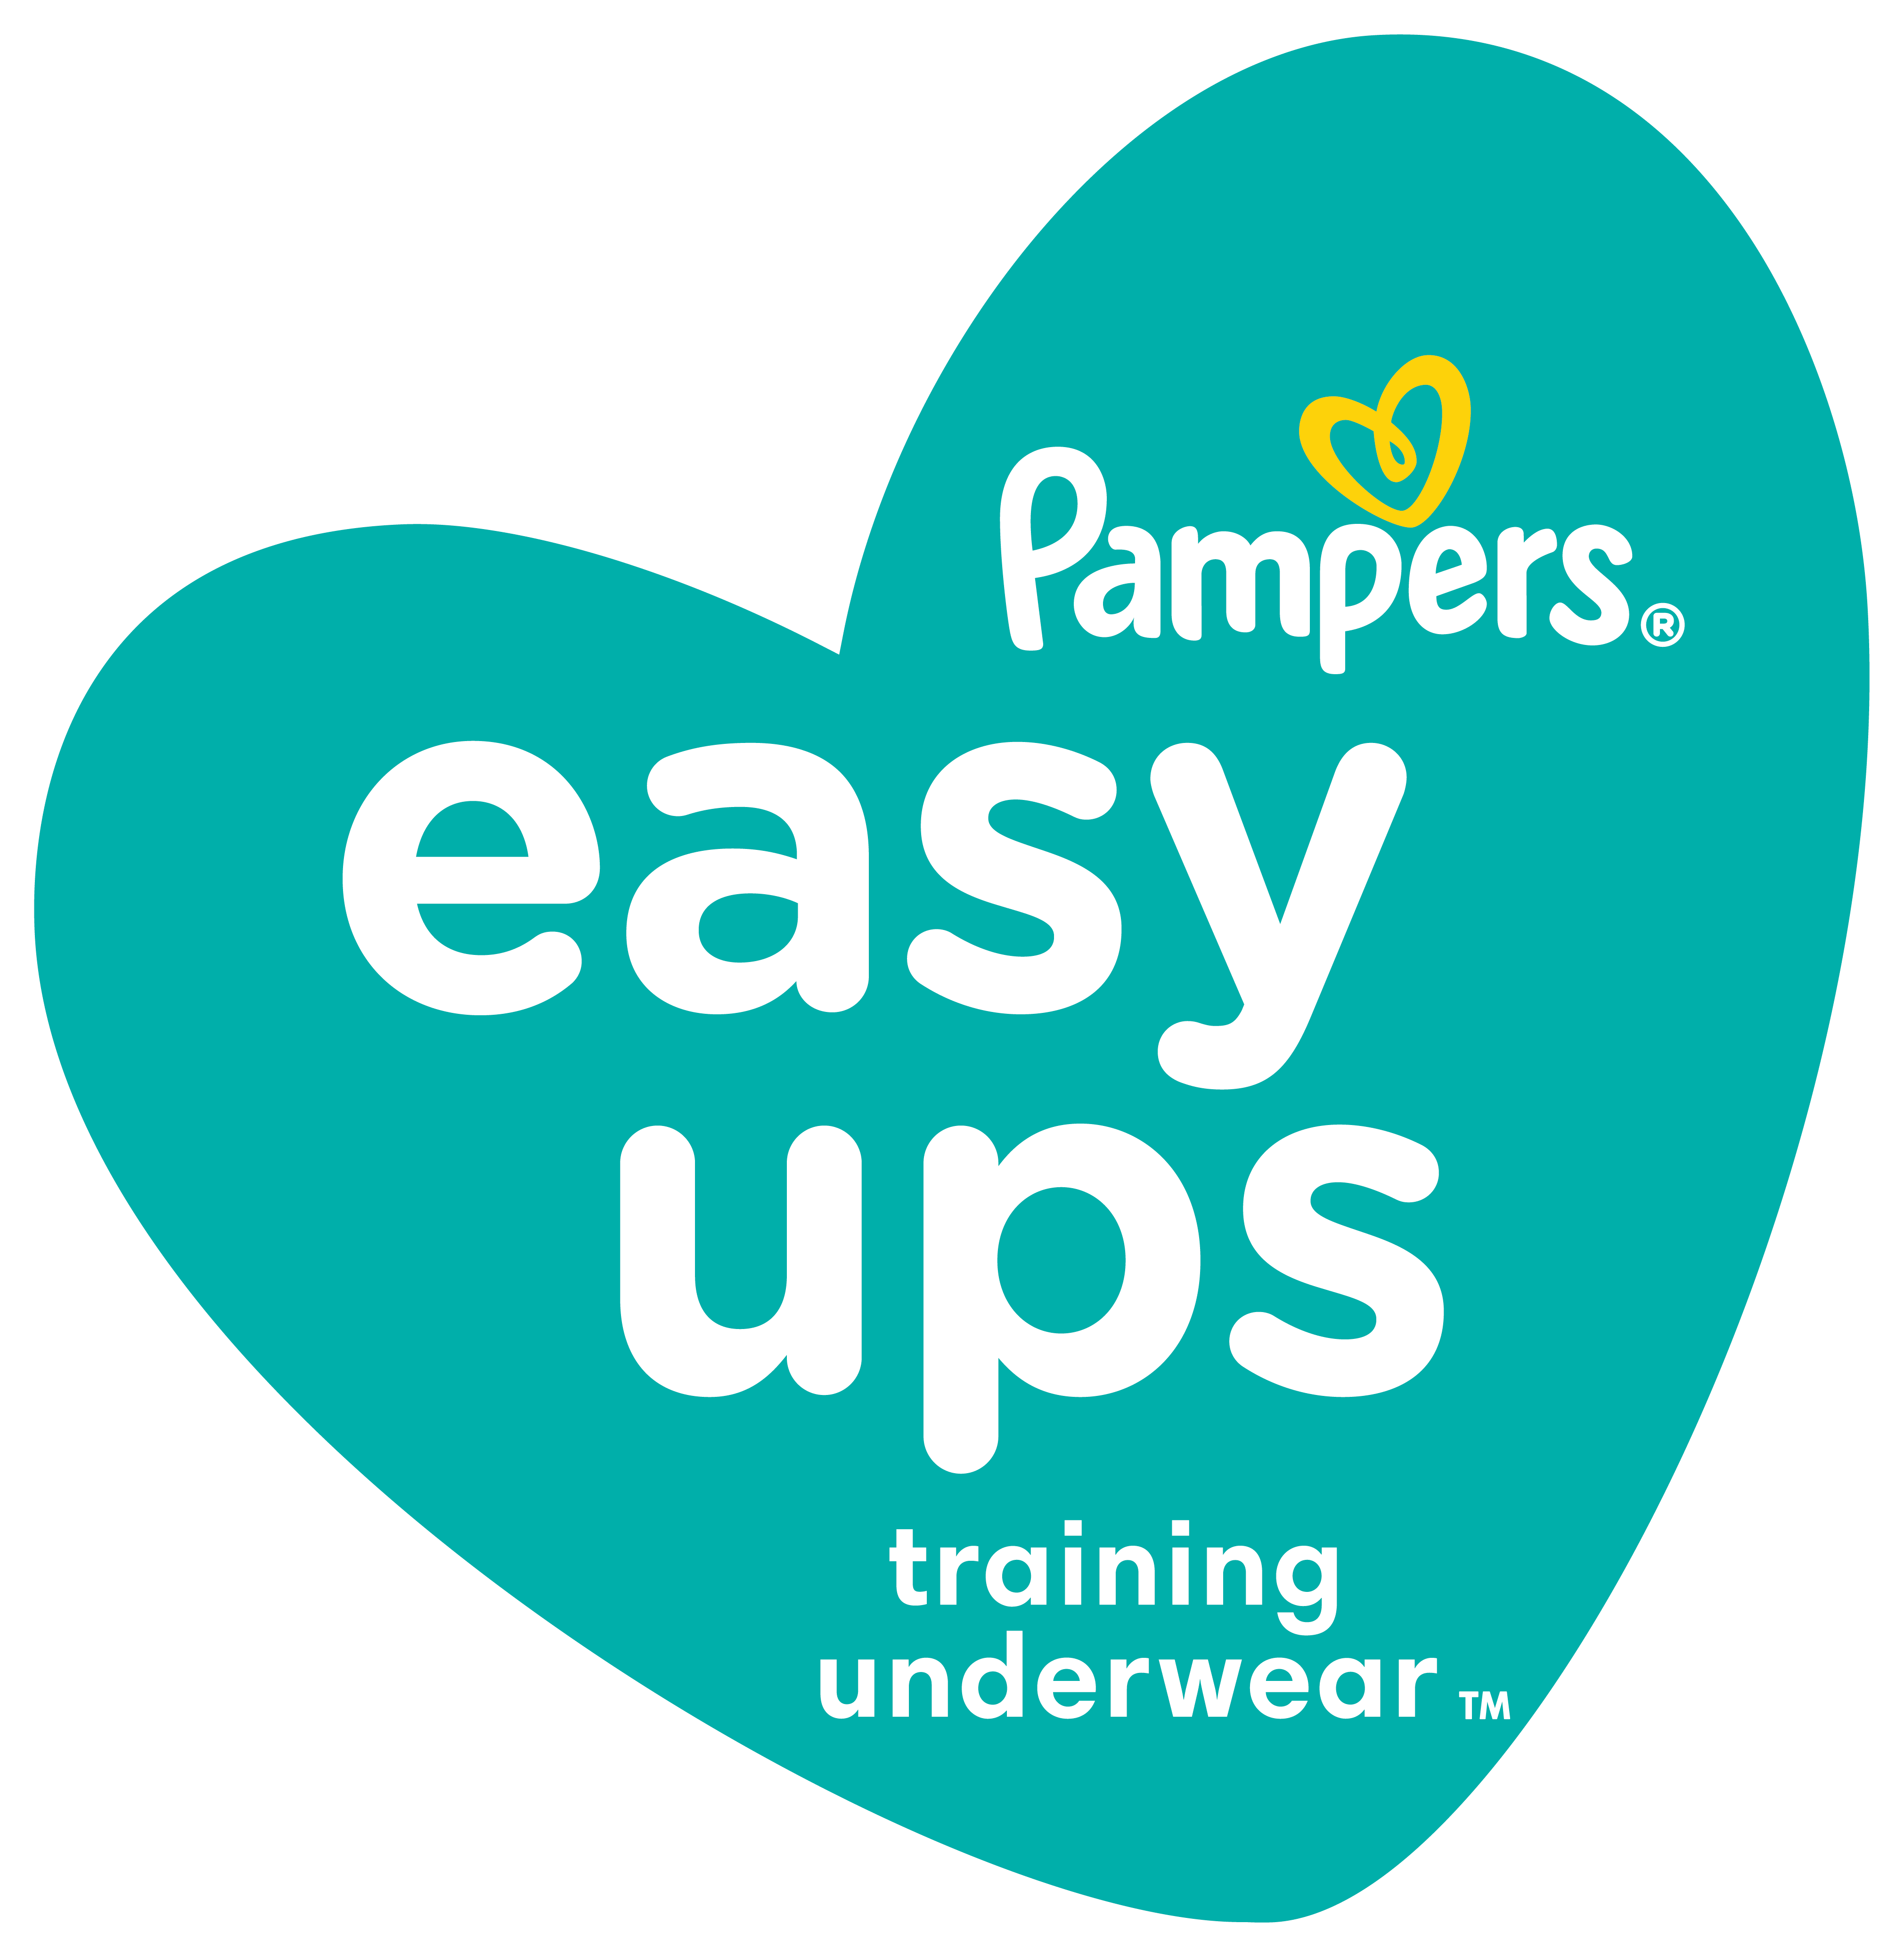 New Peppa Pig Pampers Easy Ups Are At Walmart — FIRST LOOK